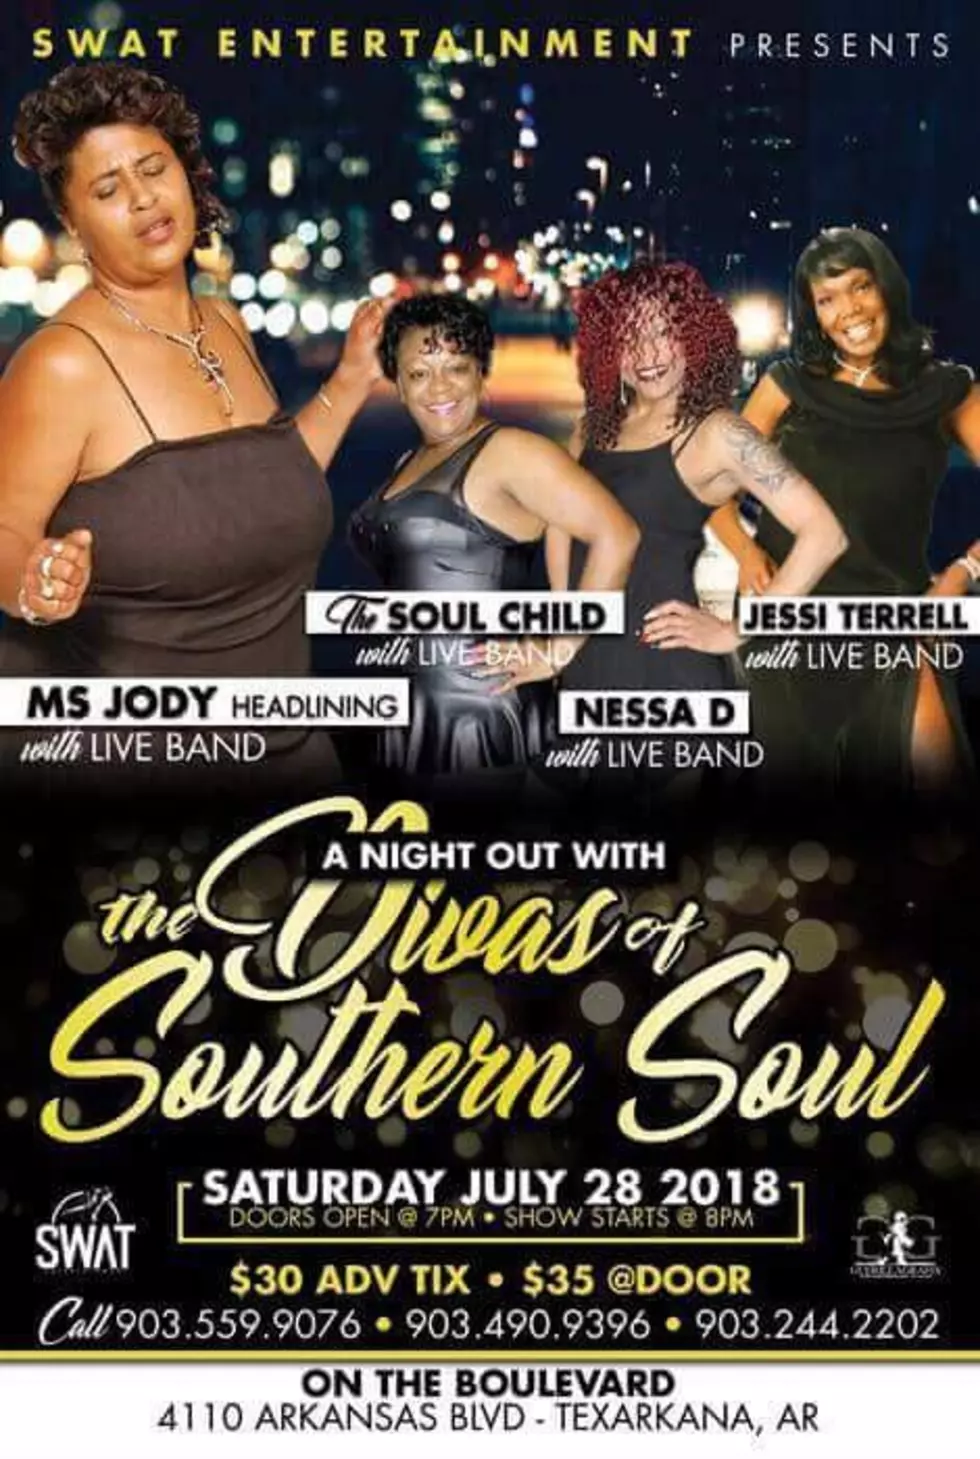 A Night Out With the Divas of Southern Soul